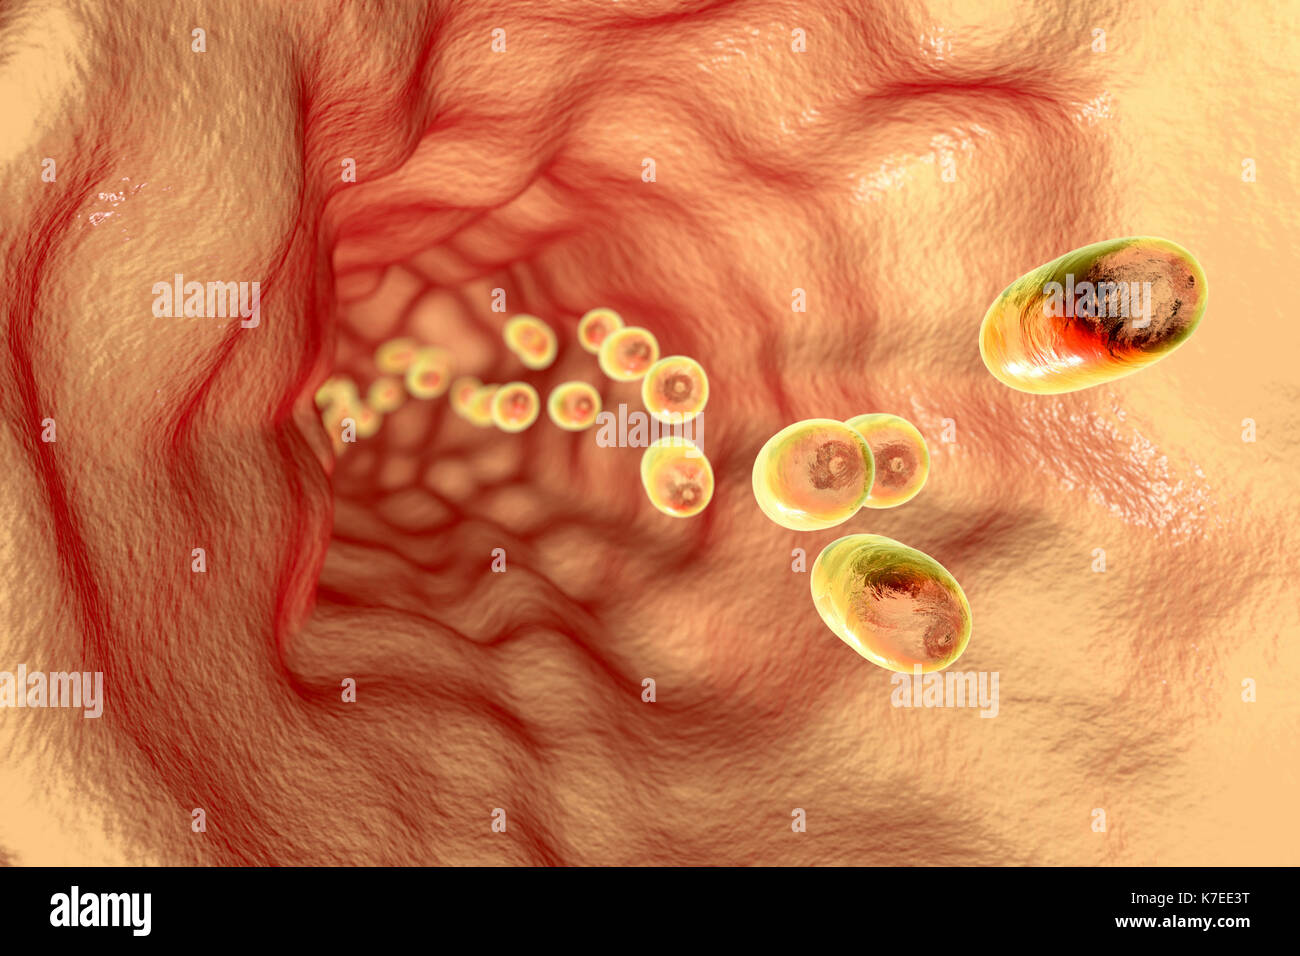 Medicines in oesophagus, oral delivery of drugs, computer illustration. Stock Photo